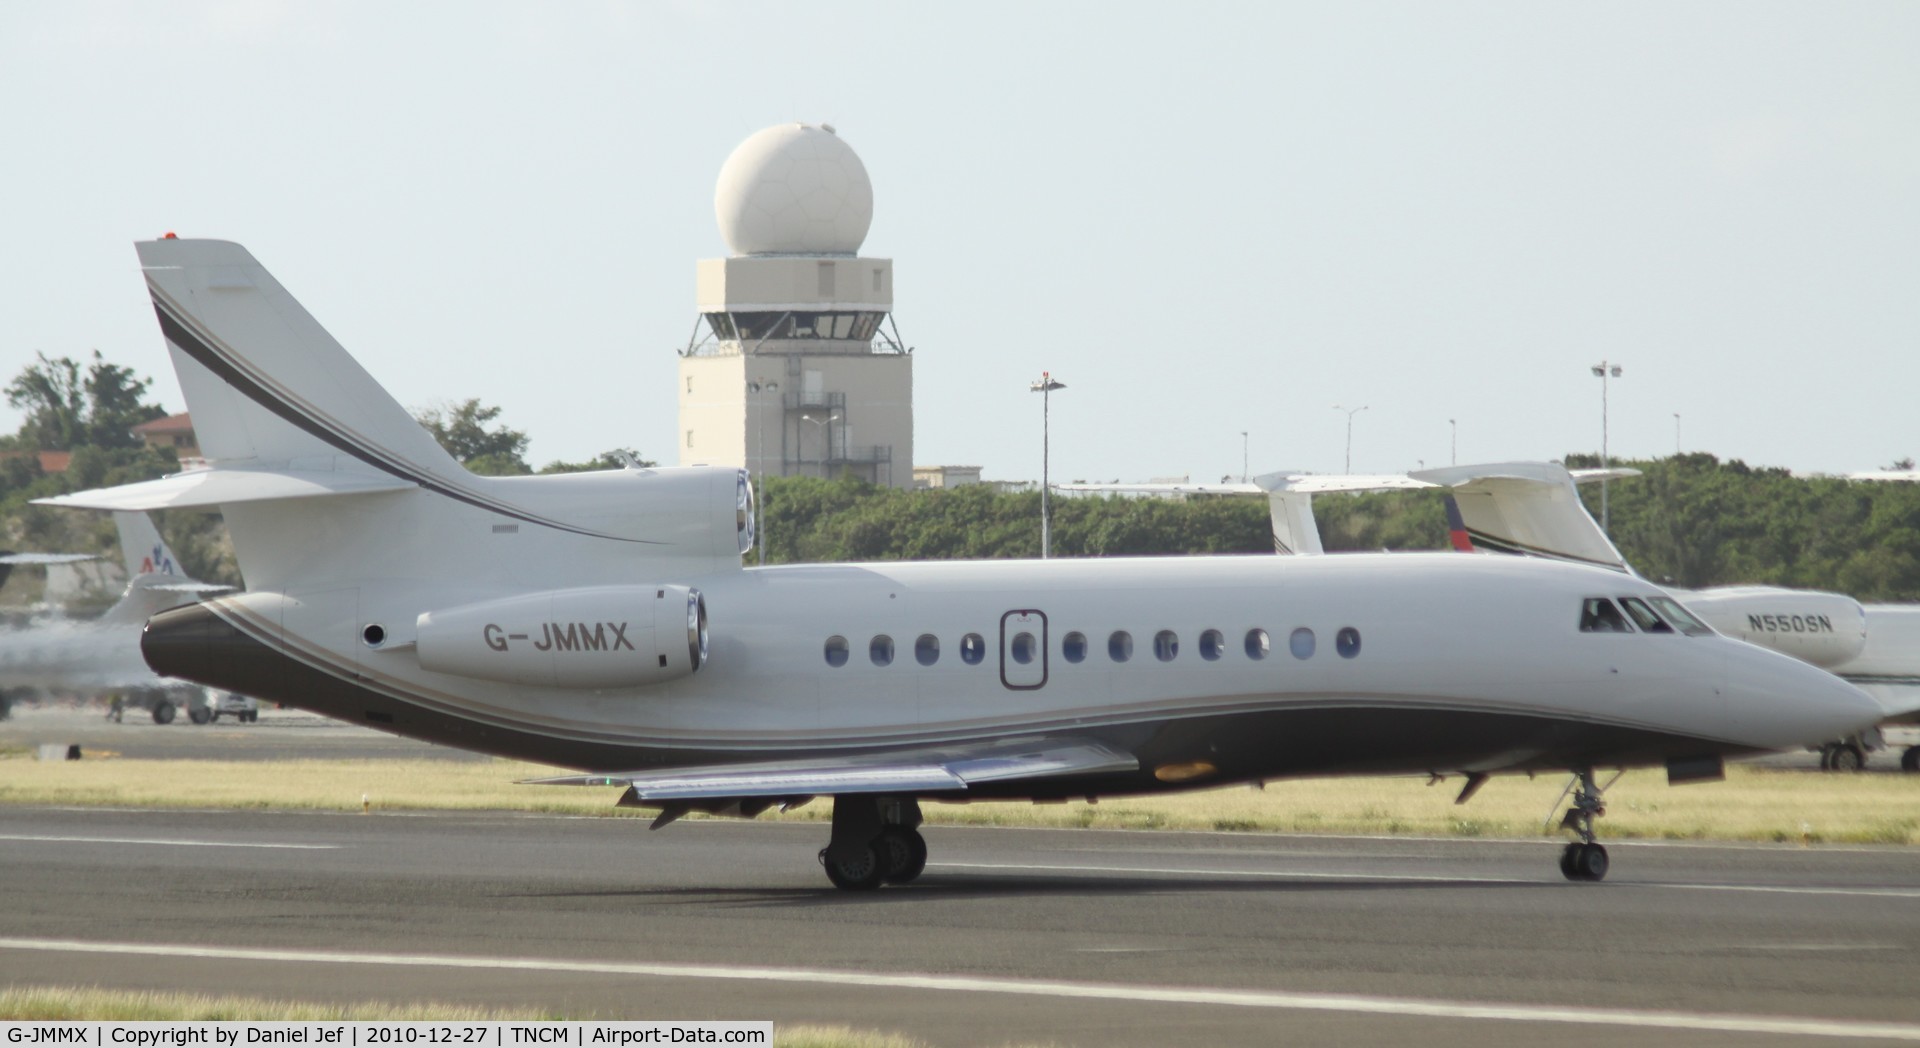 G-JMMX, 2007 Dassault Falcon 900EX C/N 184, G-JMMX back tracking the active for parking at TNCM